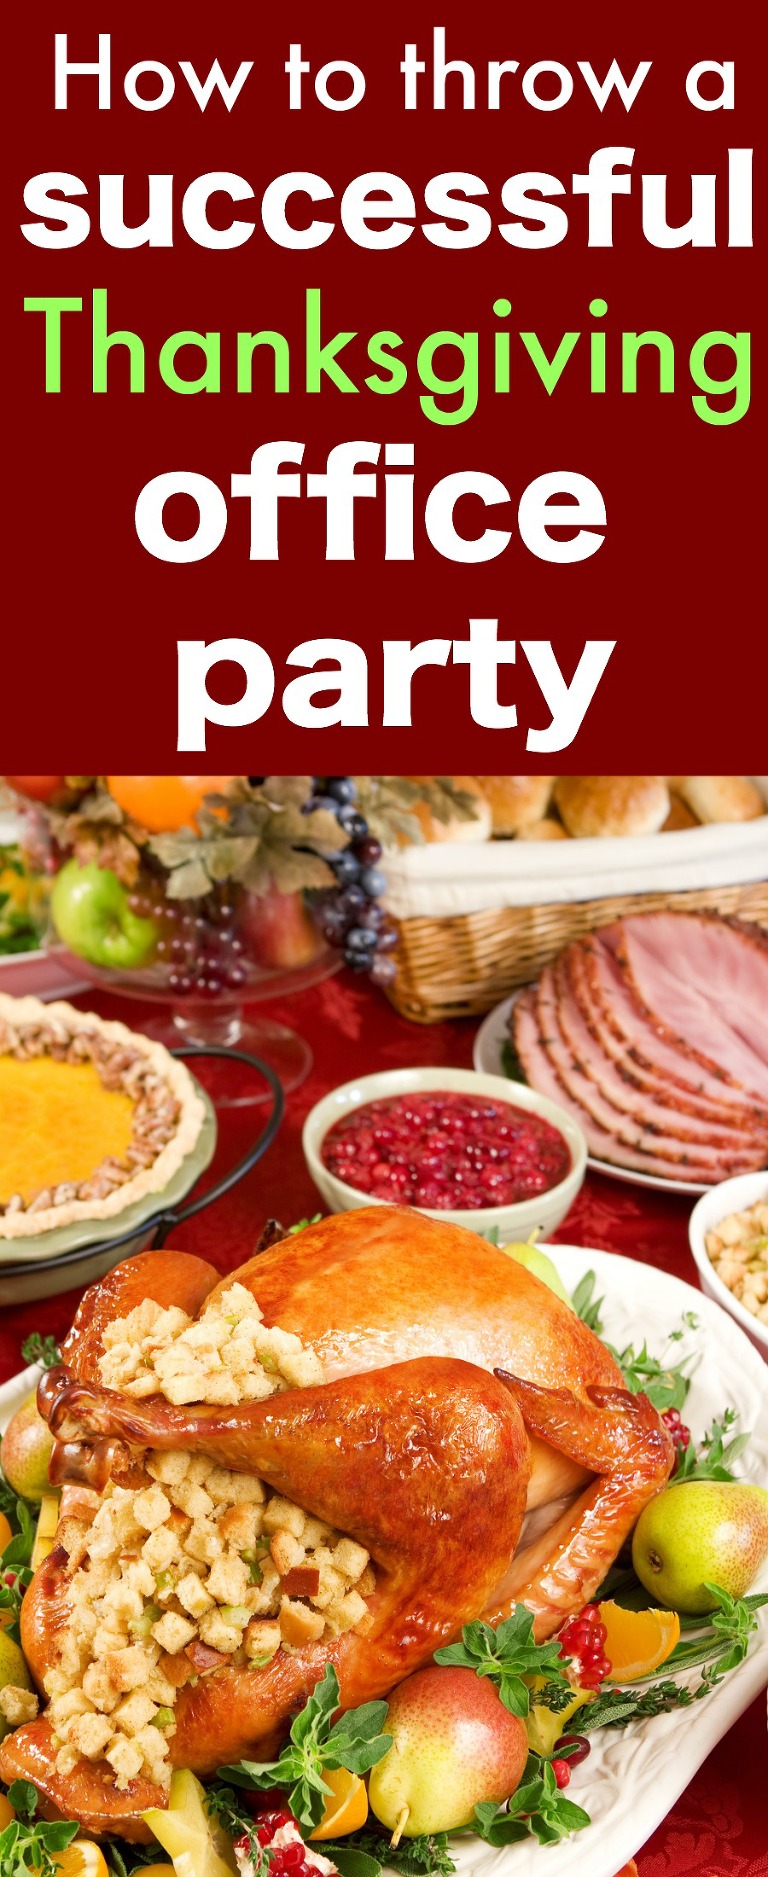 How to throw a successful Thanksgiving office party - My Mommy Style